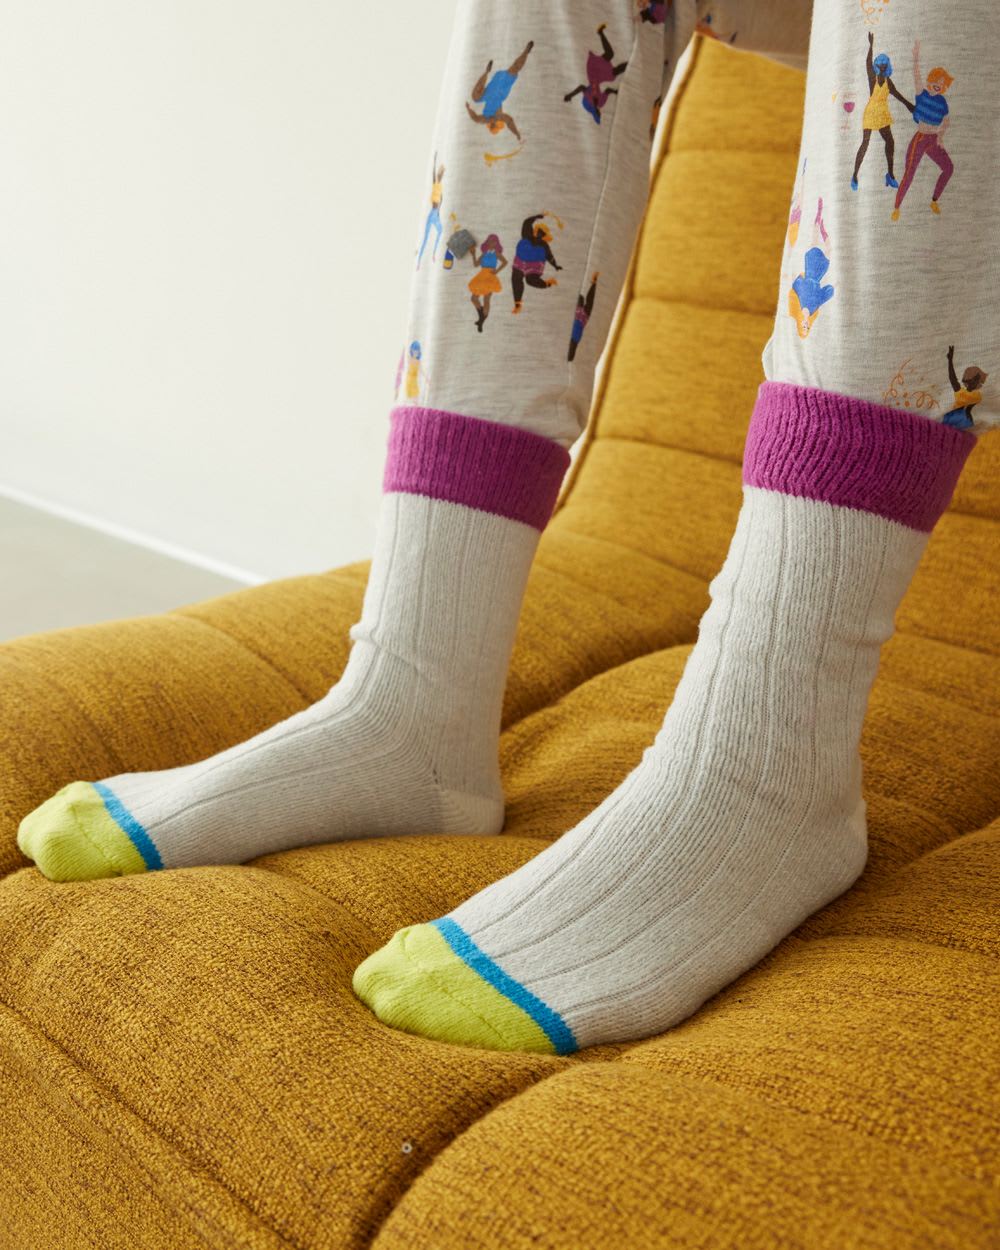 Super-Soft Knit Socks with Colour-Block Pattern